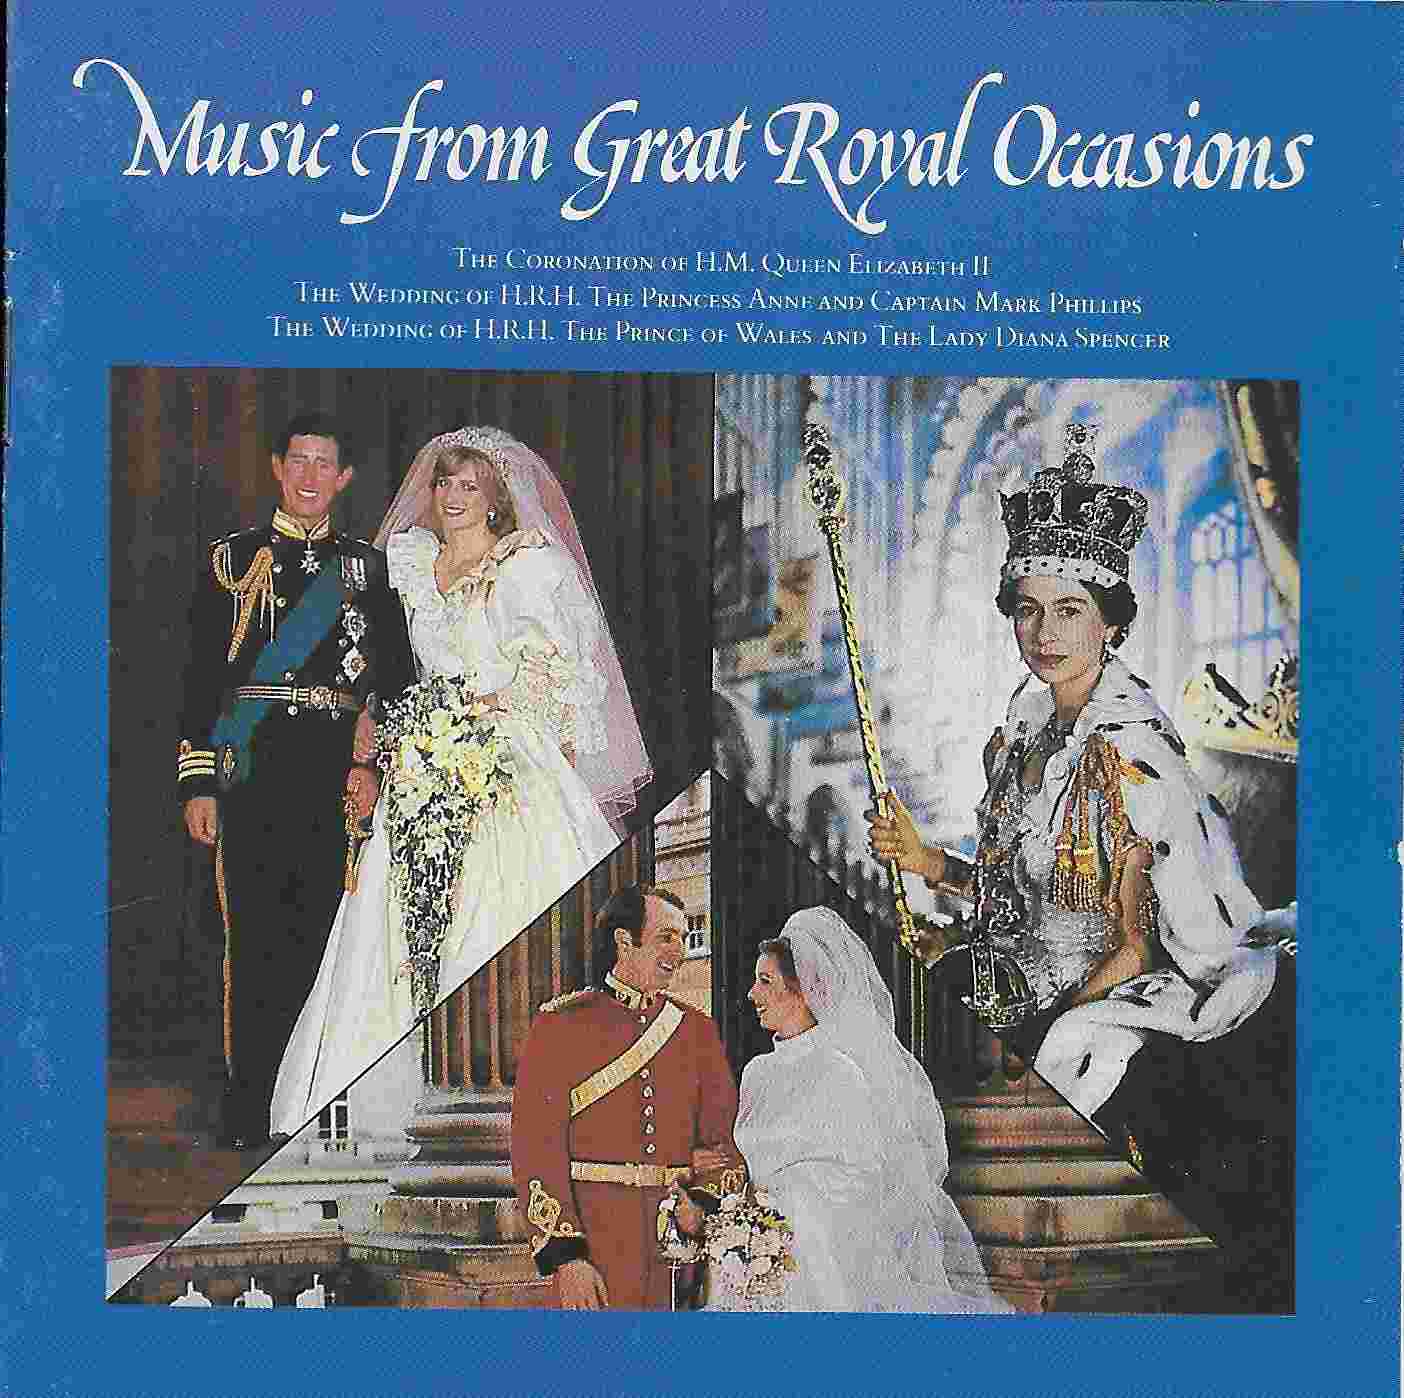 Picture of BBCCD470 Music from great royal occasions by artist Various from the BBC cds - Records and Tapes library